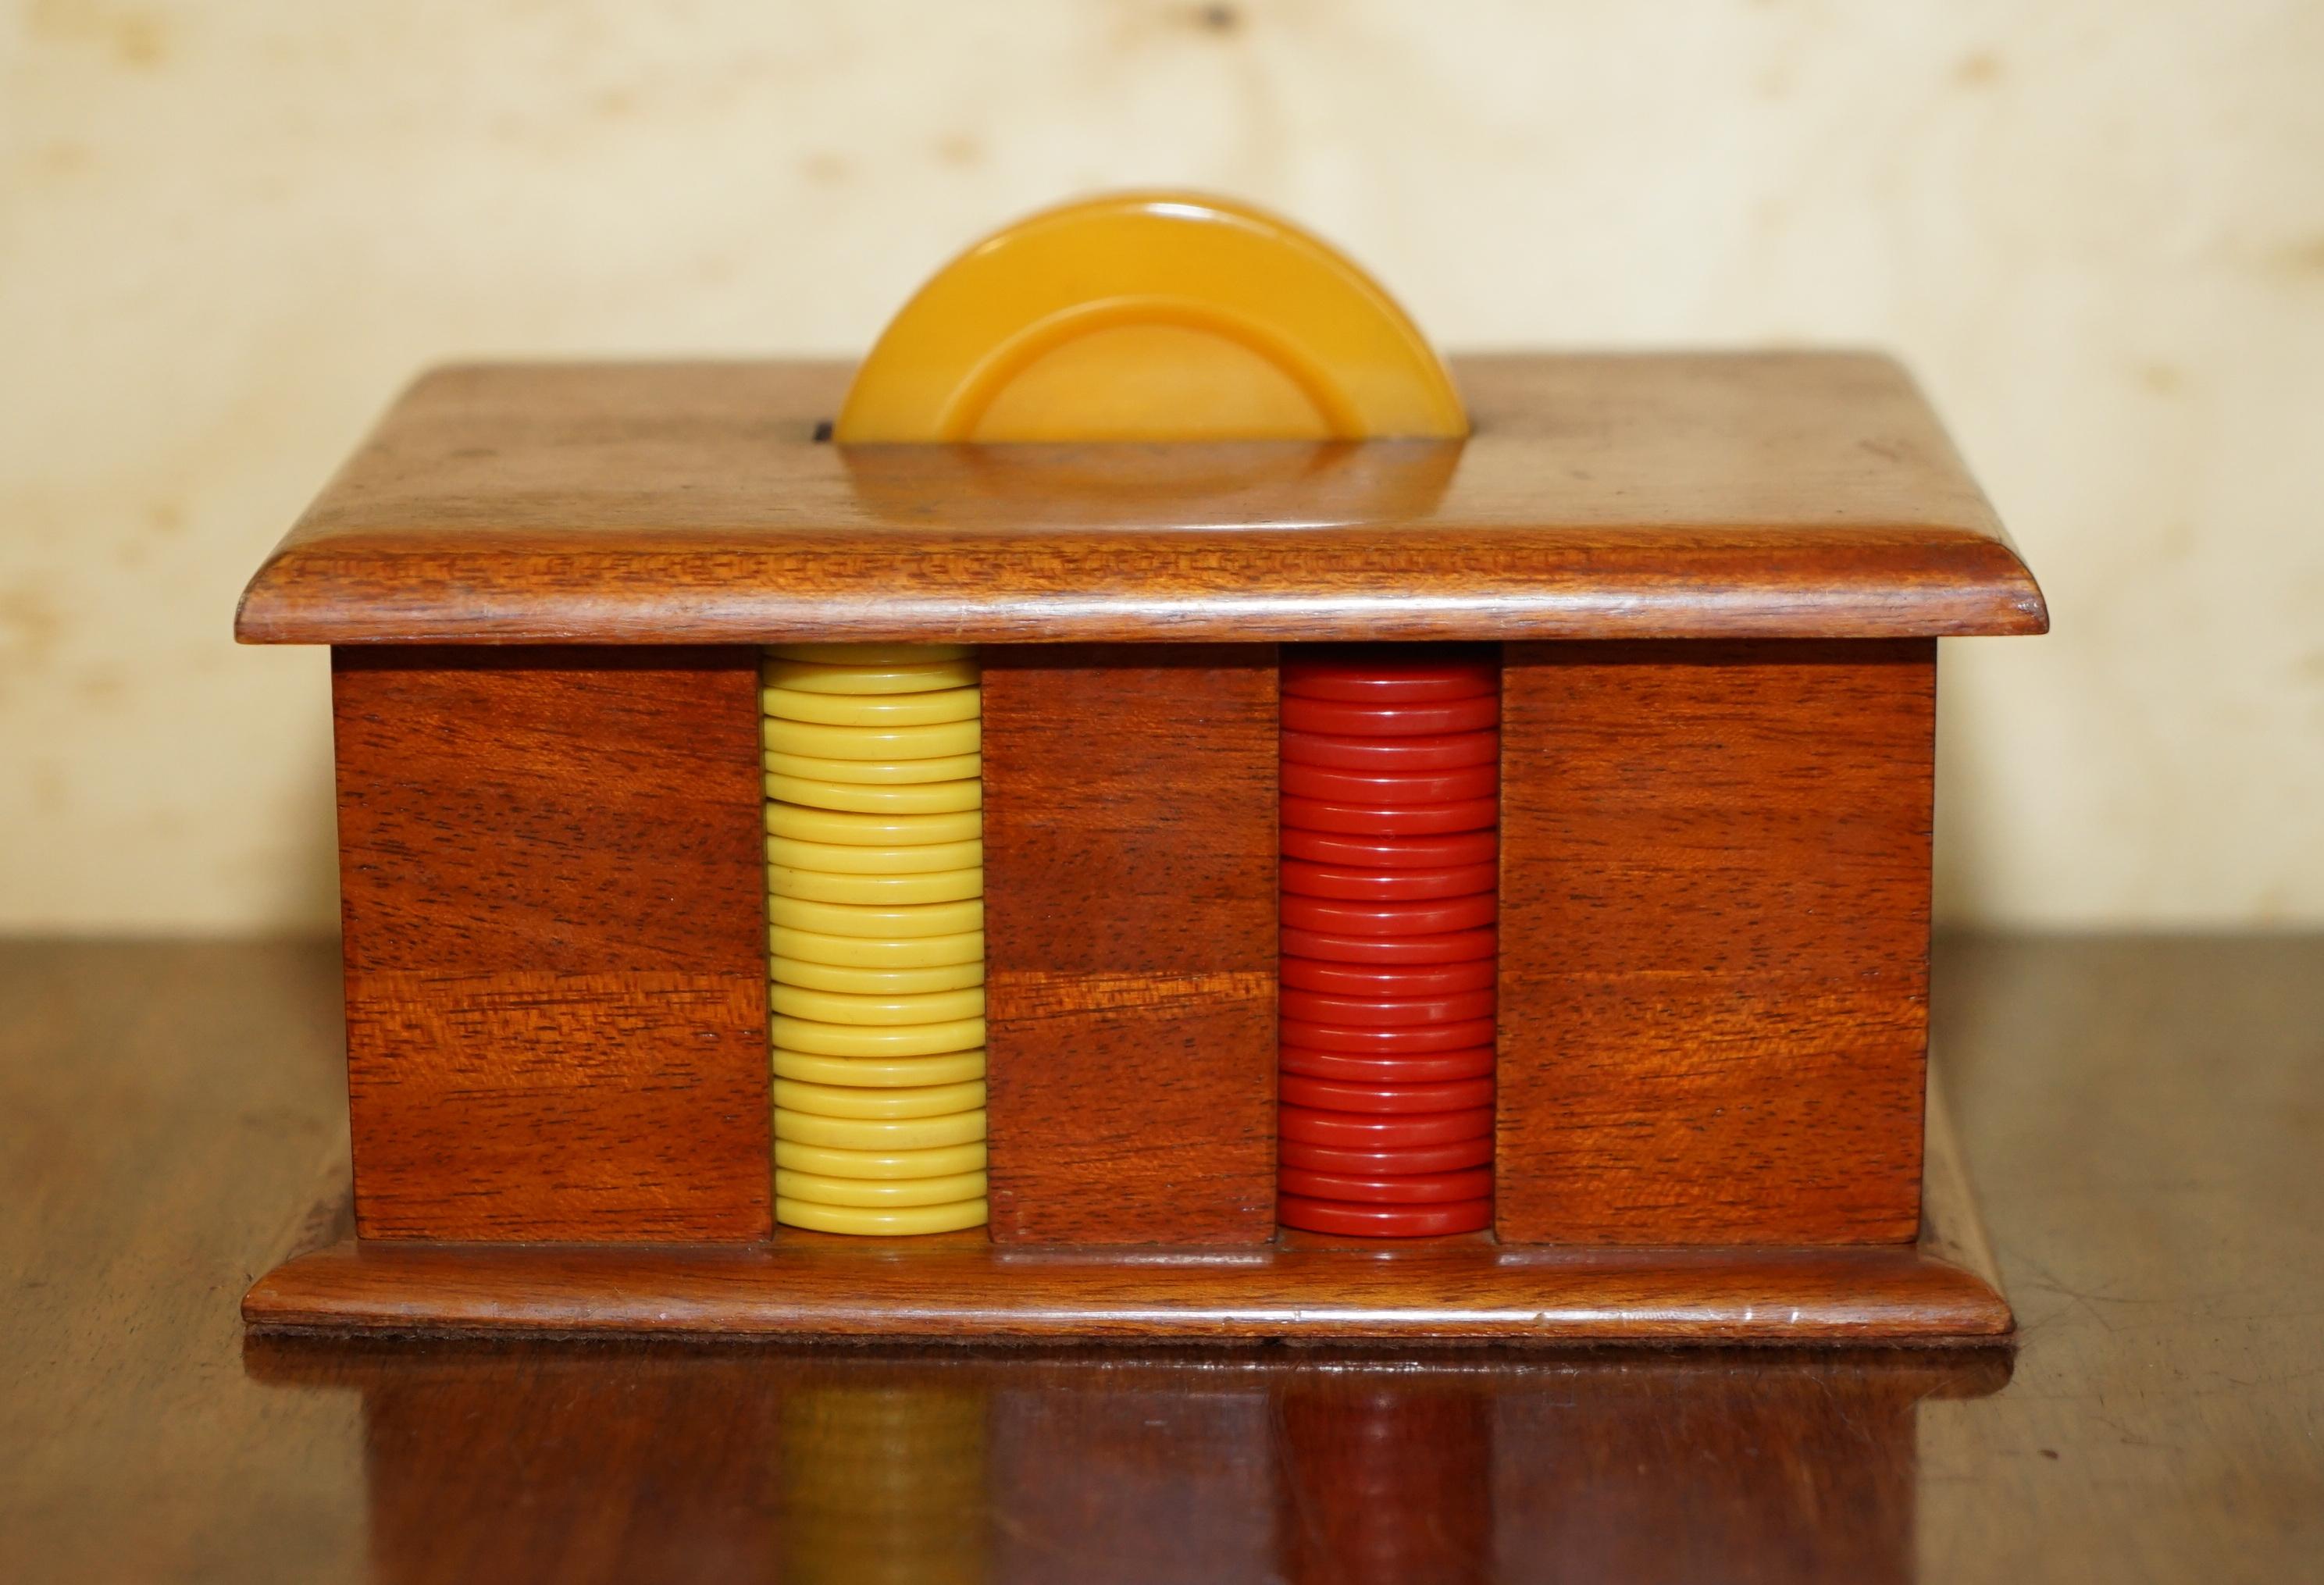 Royal House Antiques

Royal House Antiques is delighted to offer for sale this very nice circa 1920 Art Deco casino chip / poker set in the original wood case with Bakelite handle

A very decorative and cool suite, very much of the period and adds a